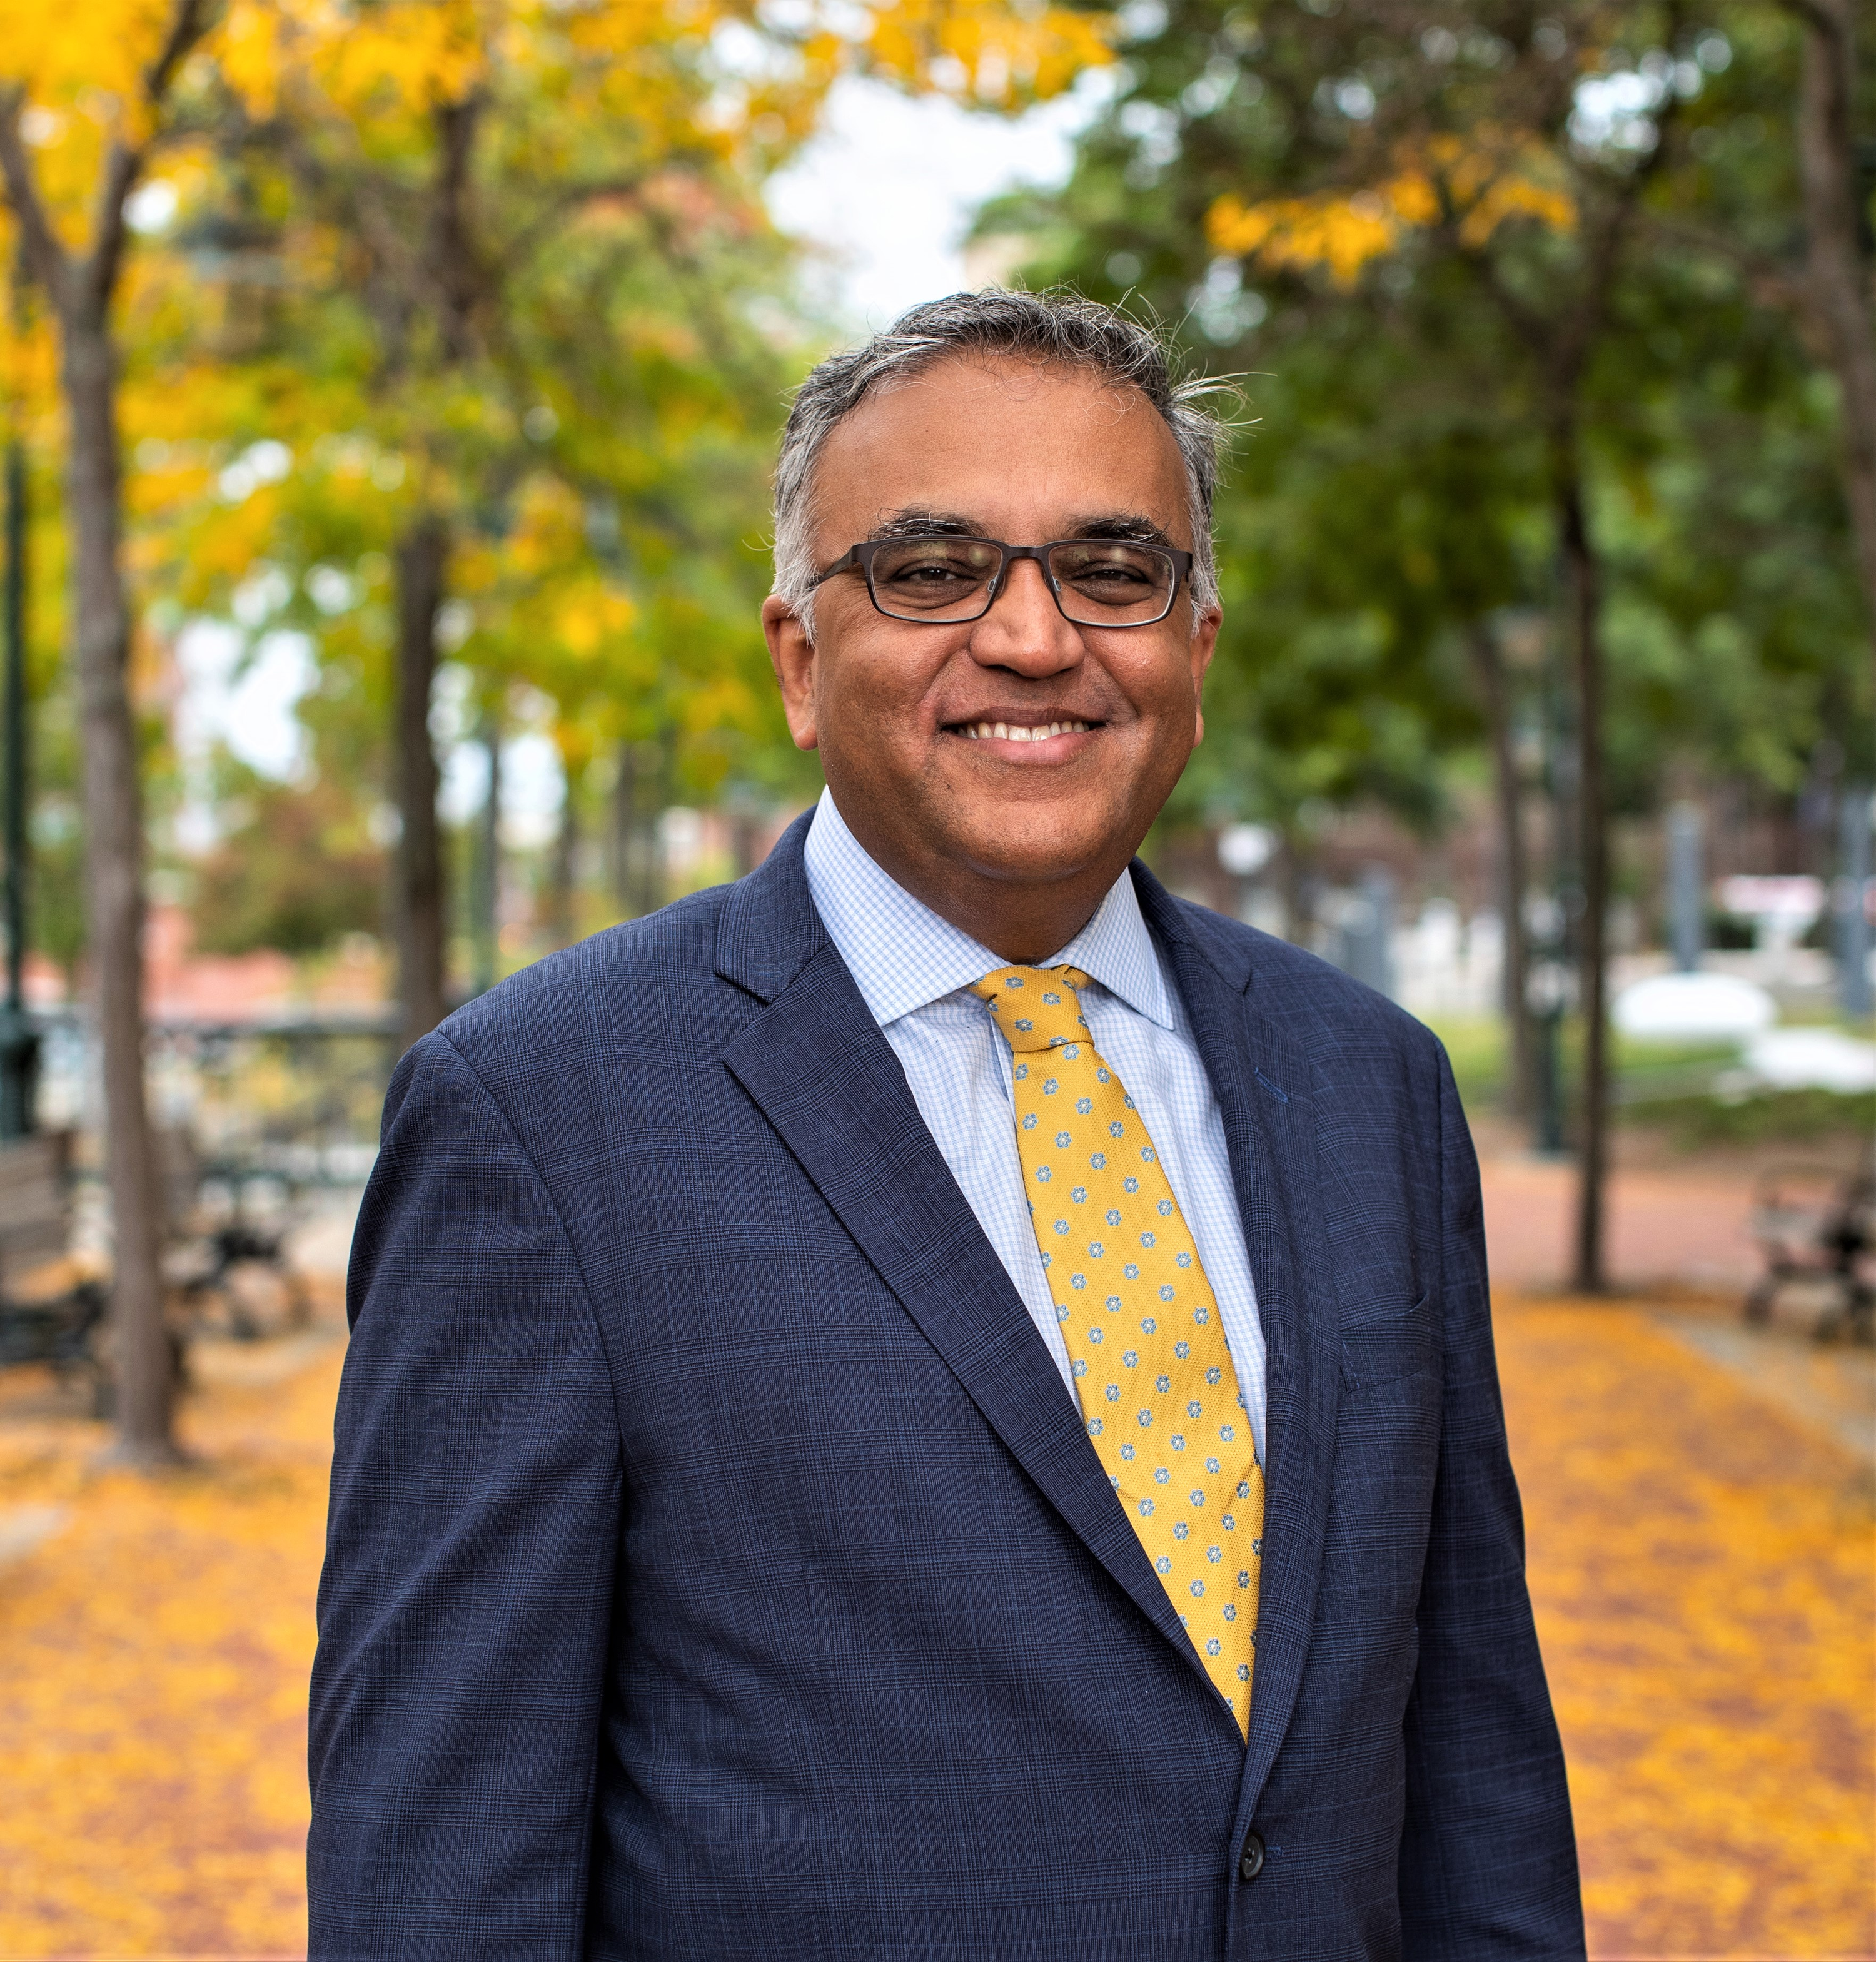 Welcome to Episode 22 of “COVID: What comes next,” an exclusive weekly Providence Journal/USA TODAY NETWORK podcast featuring Dr. Ashish Jha, dean of the Brown University School of Public Health and an internationally respected expert on pandemic response and preparedness.